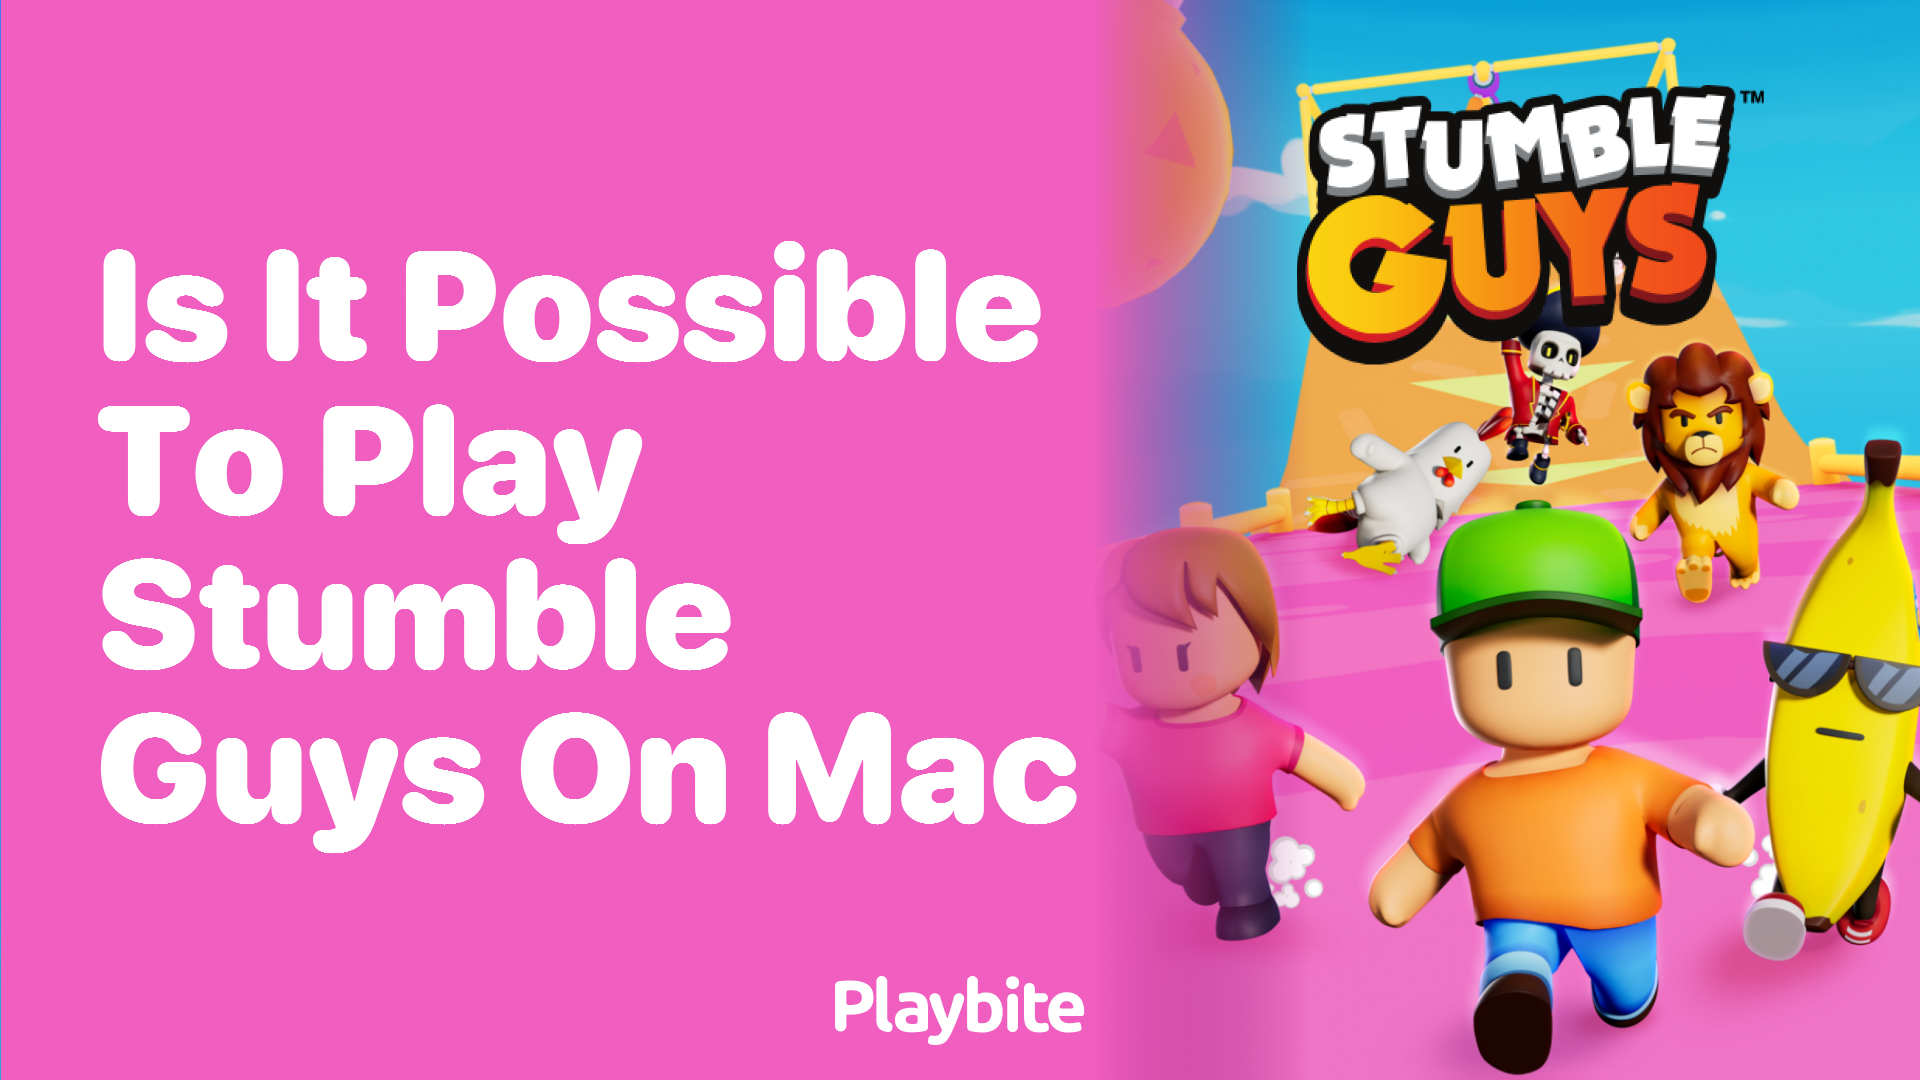 Is It Possible to Play Stumble Guys on a Mac?